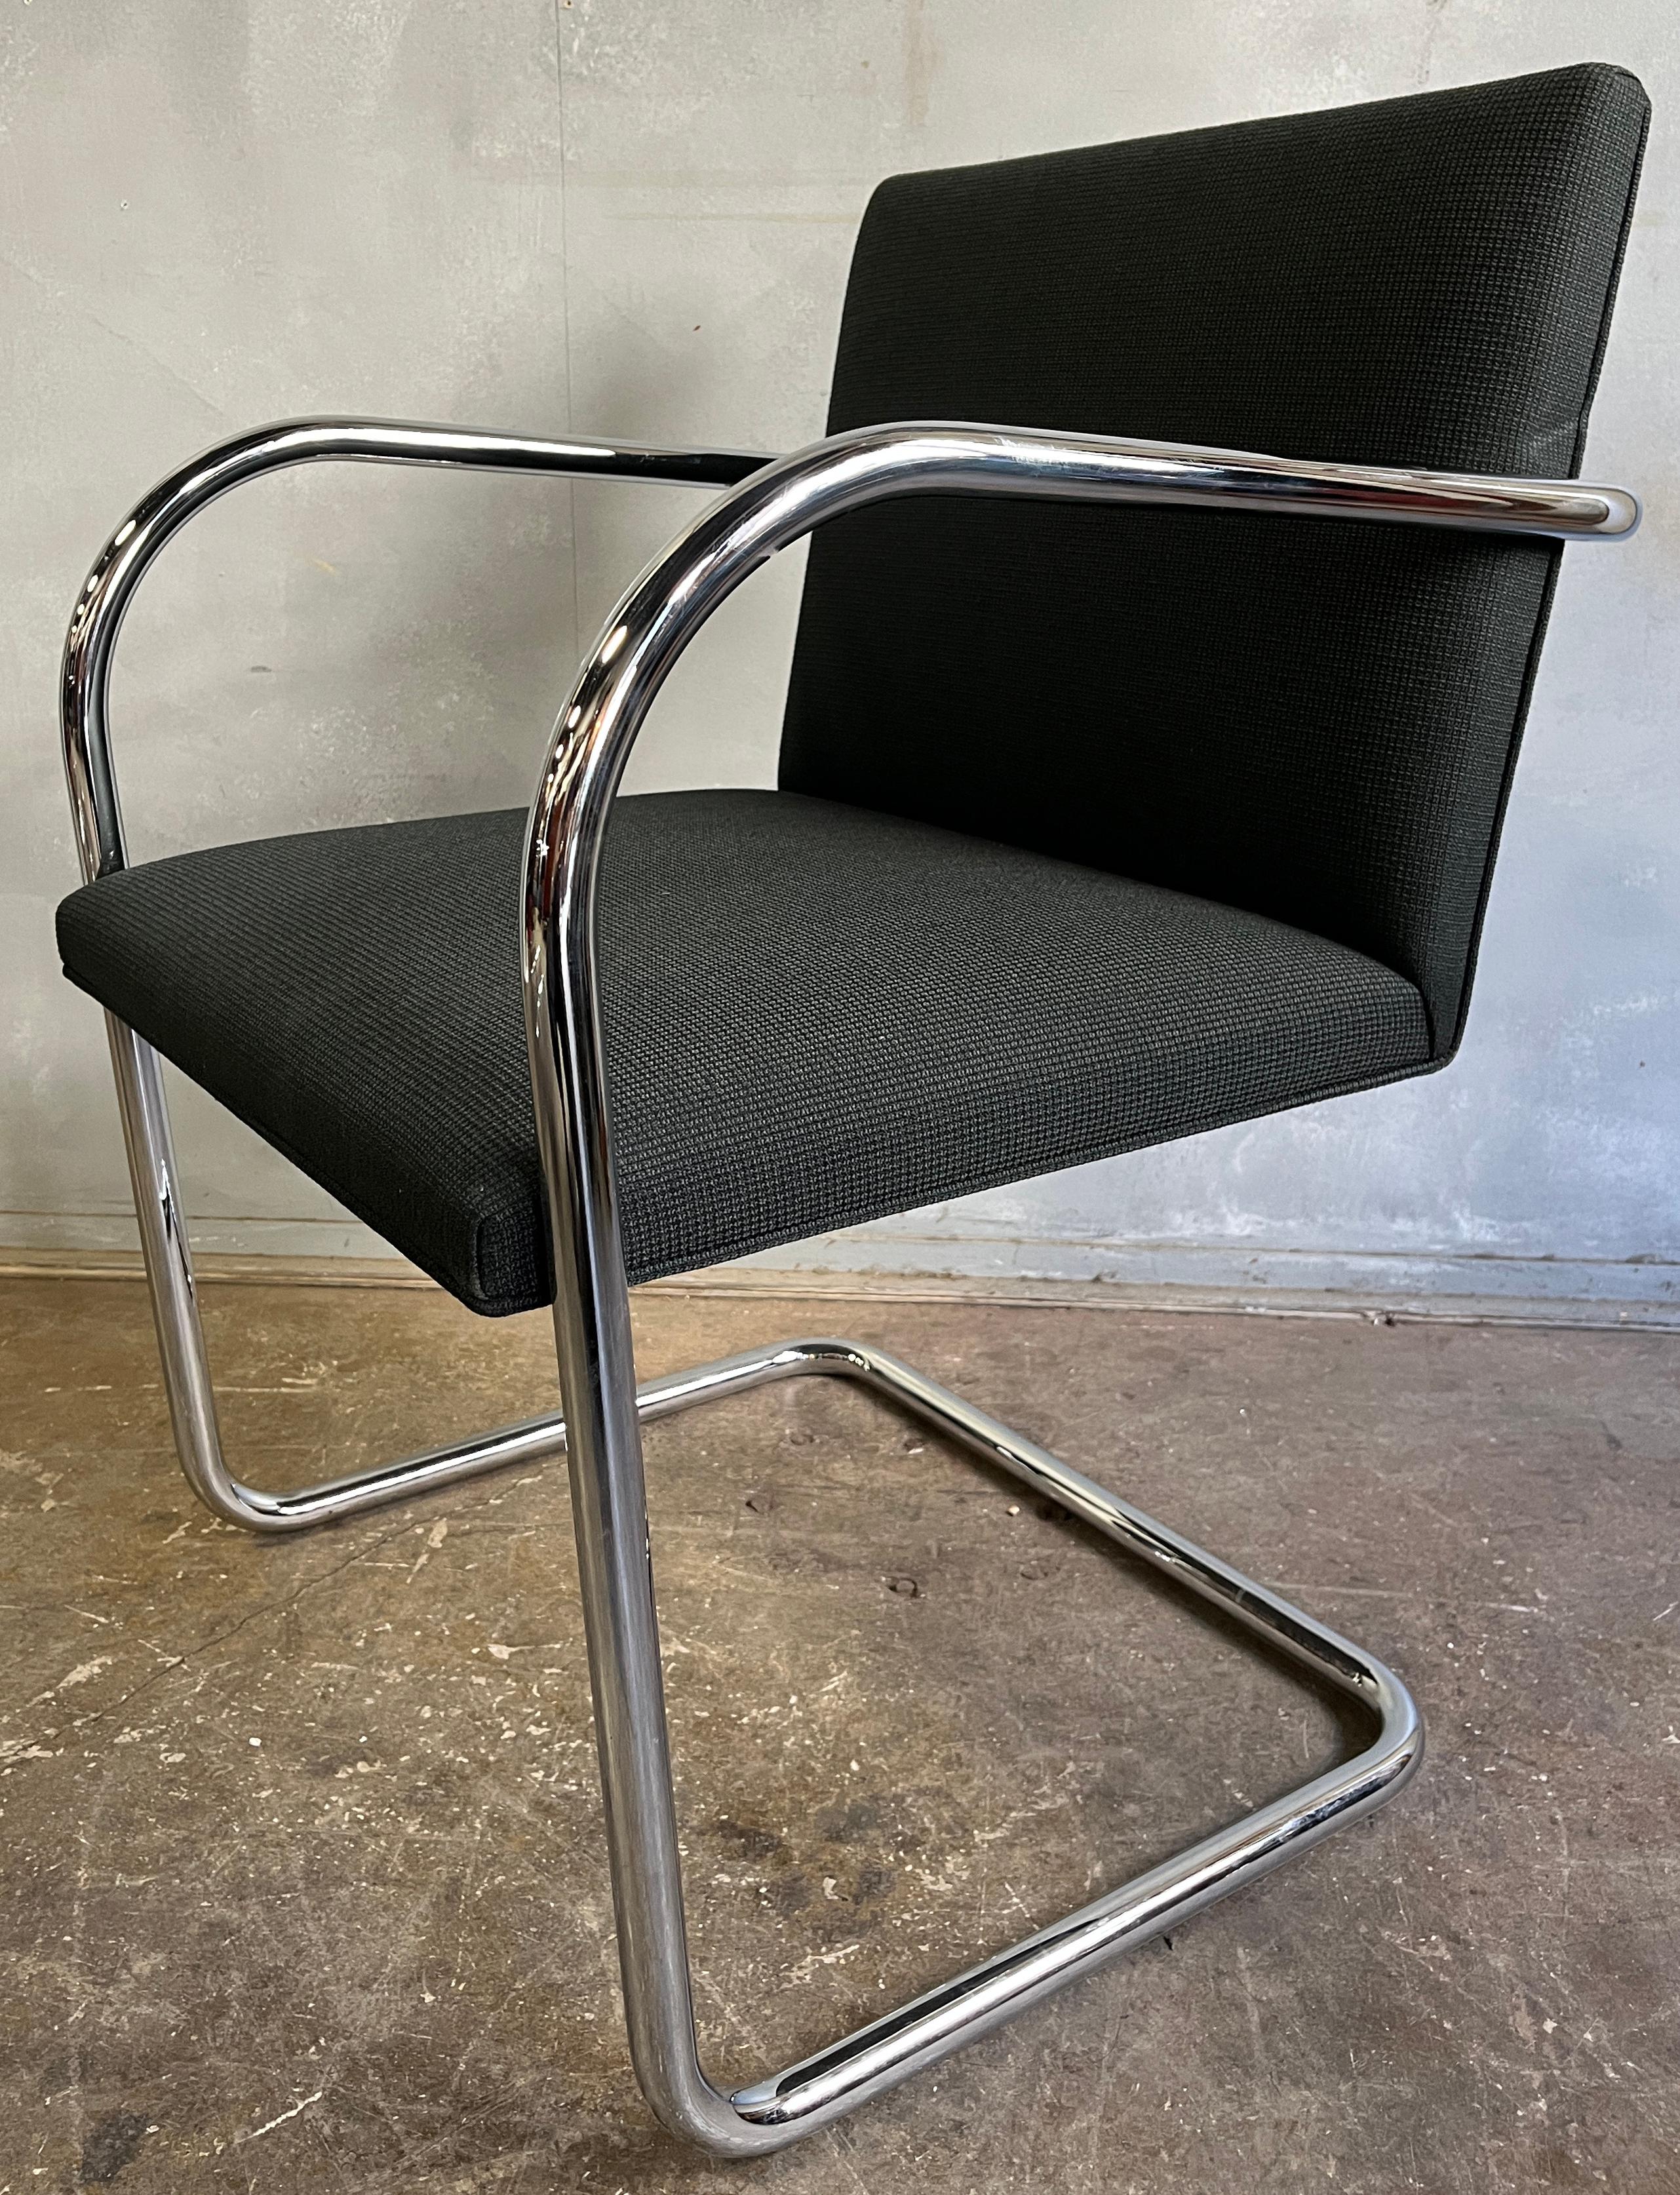 For your consideration these upholstered black Brno chairs for Knoll, designed by modernist master architect in 1930. These icons of Bauhaus design express the philosophy of the era, that form follows function. The chromed frame provides a